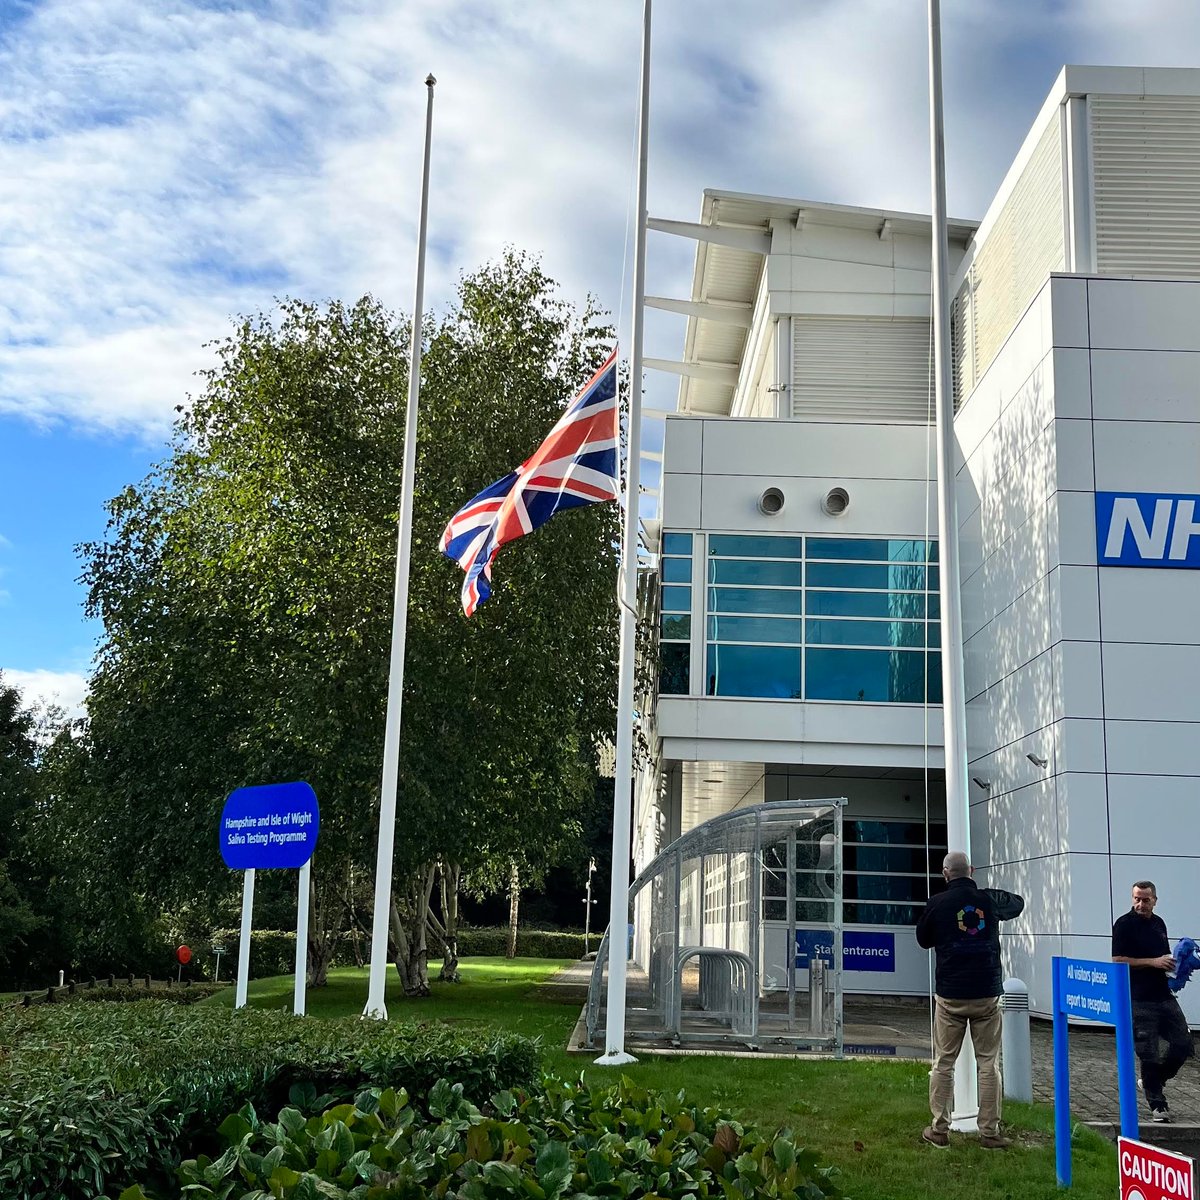 Lowering our flag to half-mast brings a moment of great sadness. We take this moment to reflect and thank our Queen for her incredible 70 years of service.